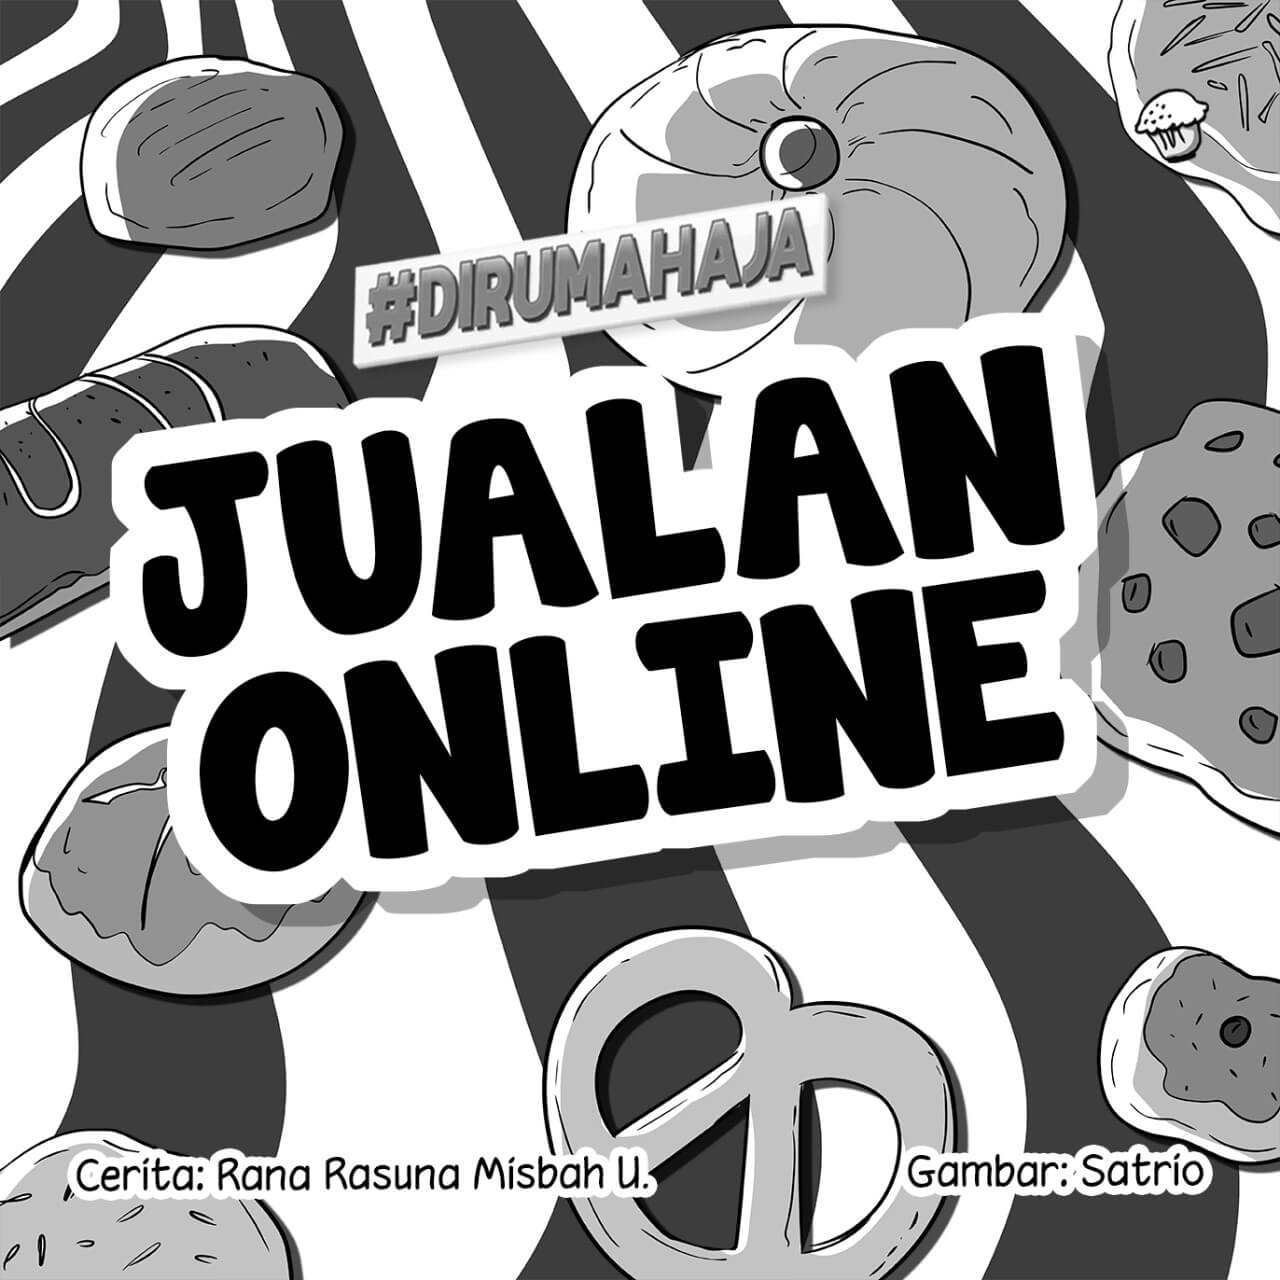 Jualan Online Cover BW